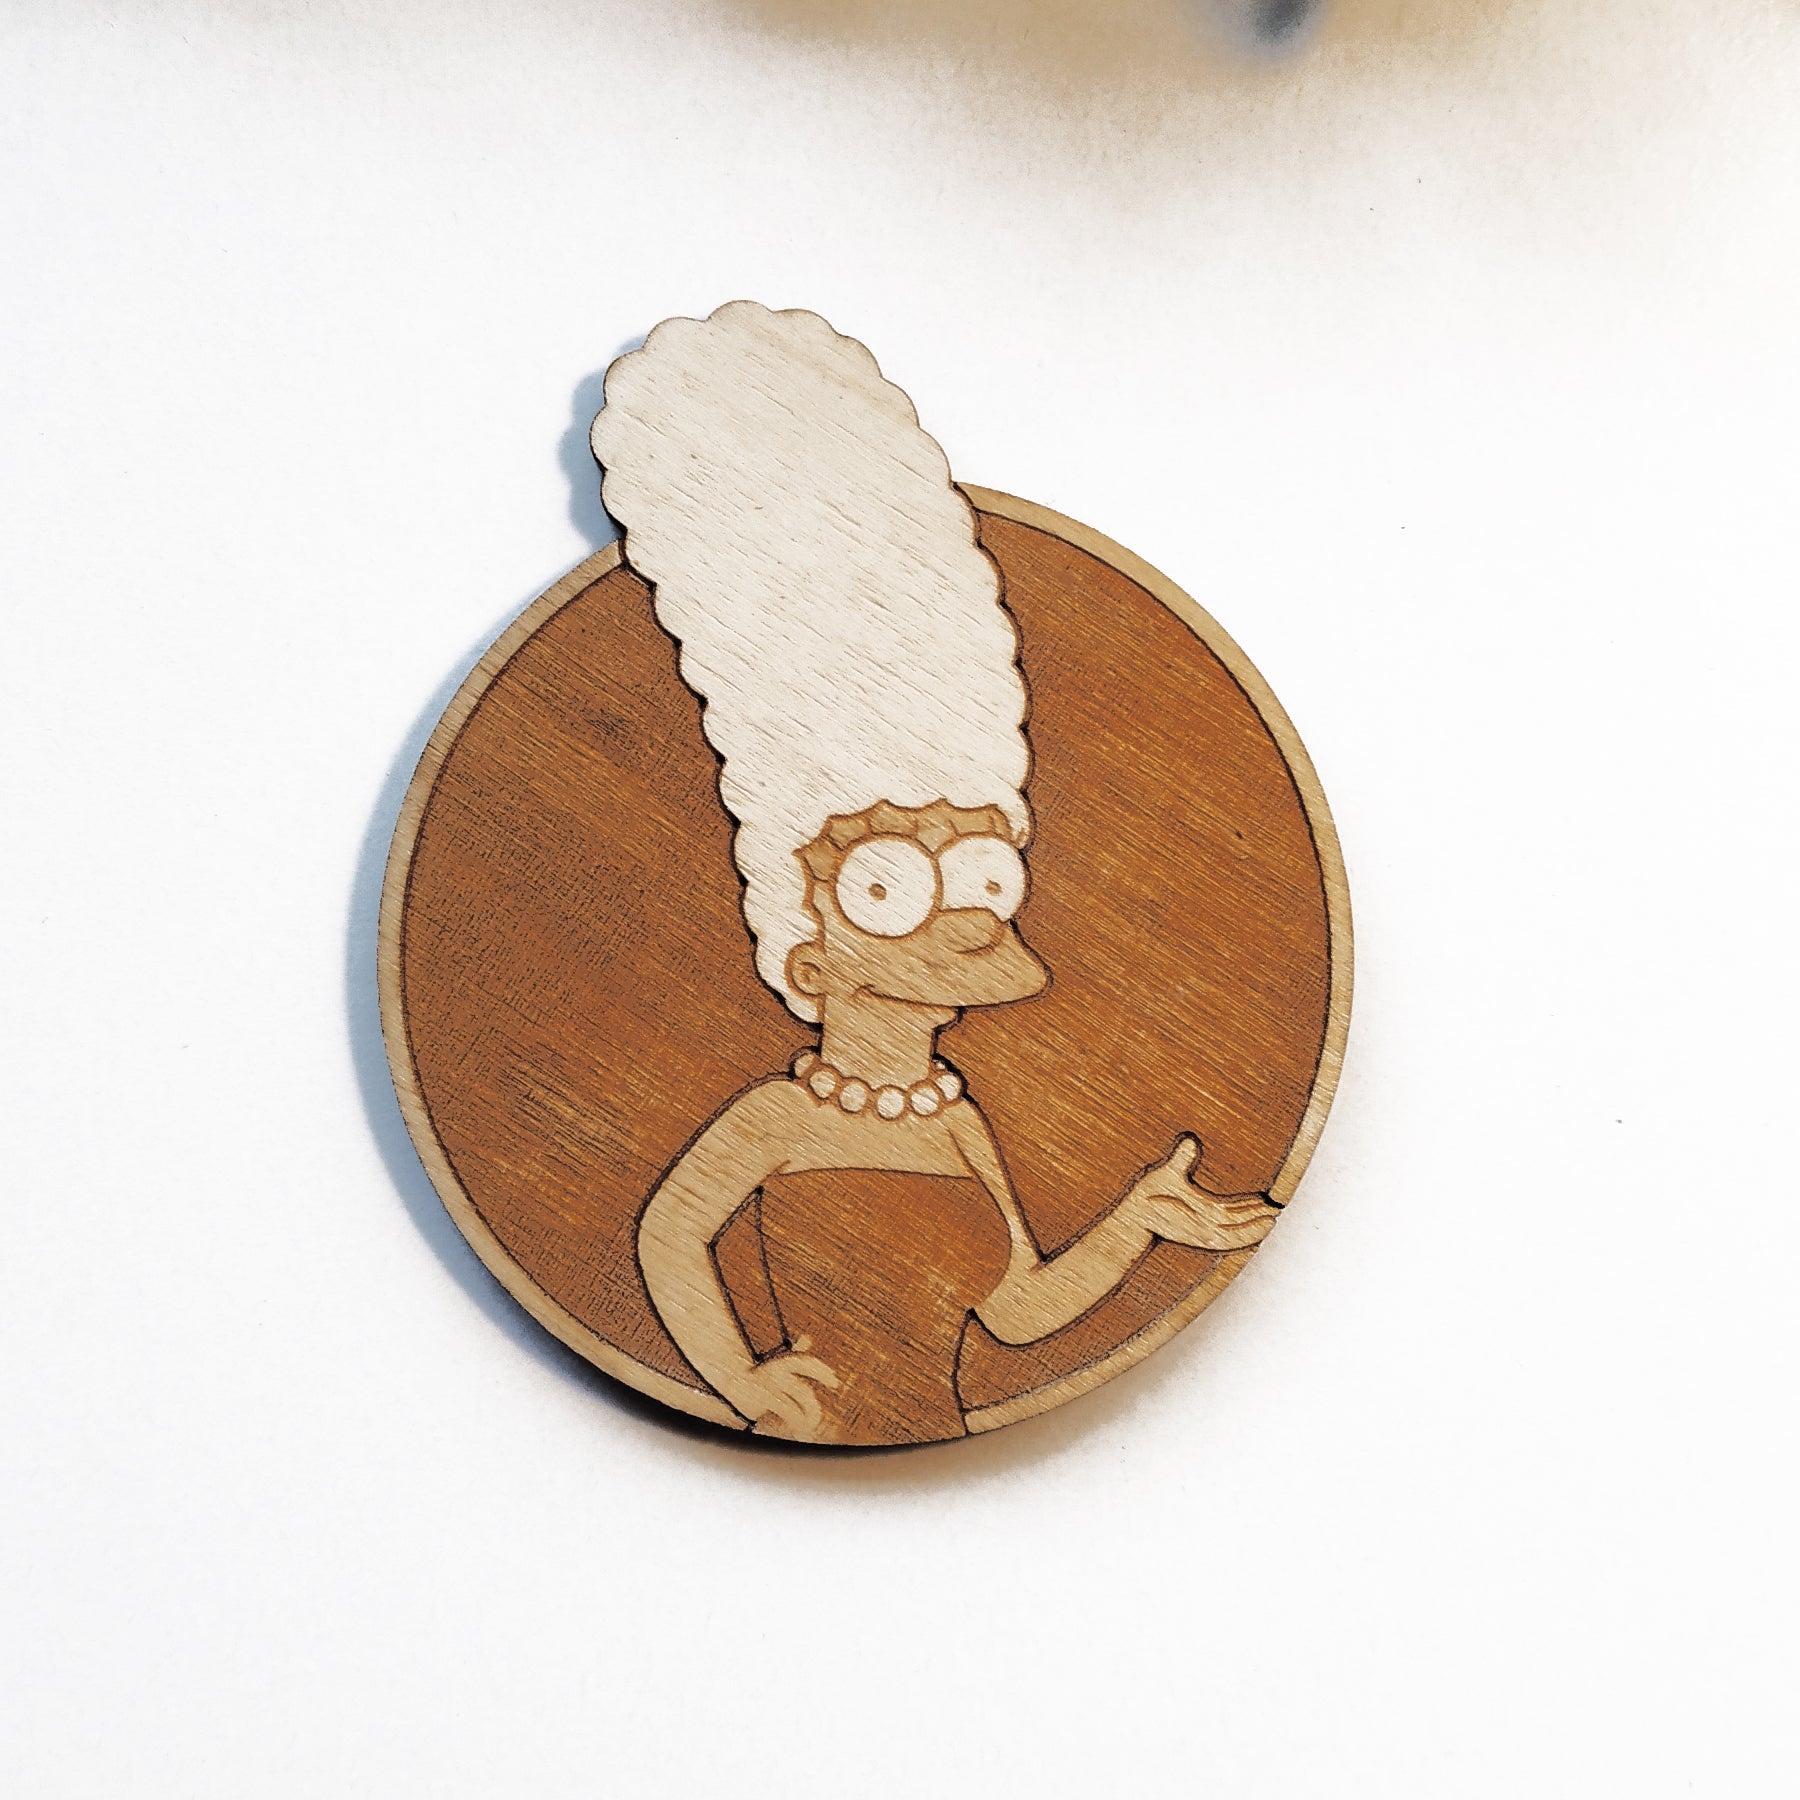 Set of 6 The Simpsons Wooden Coasters - Handmade Gift - Housewarming - Wood Kitchenware-6